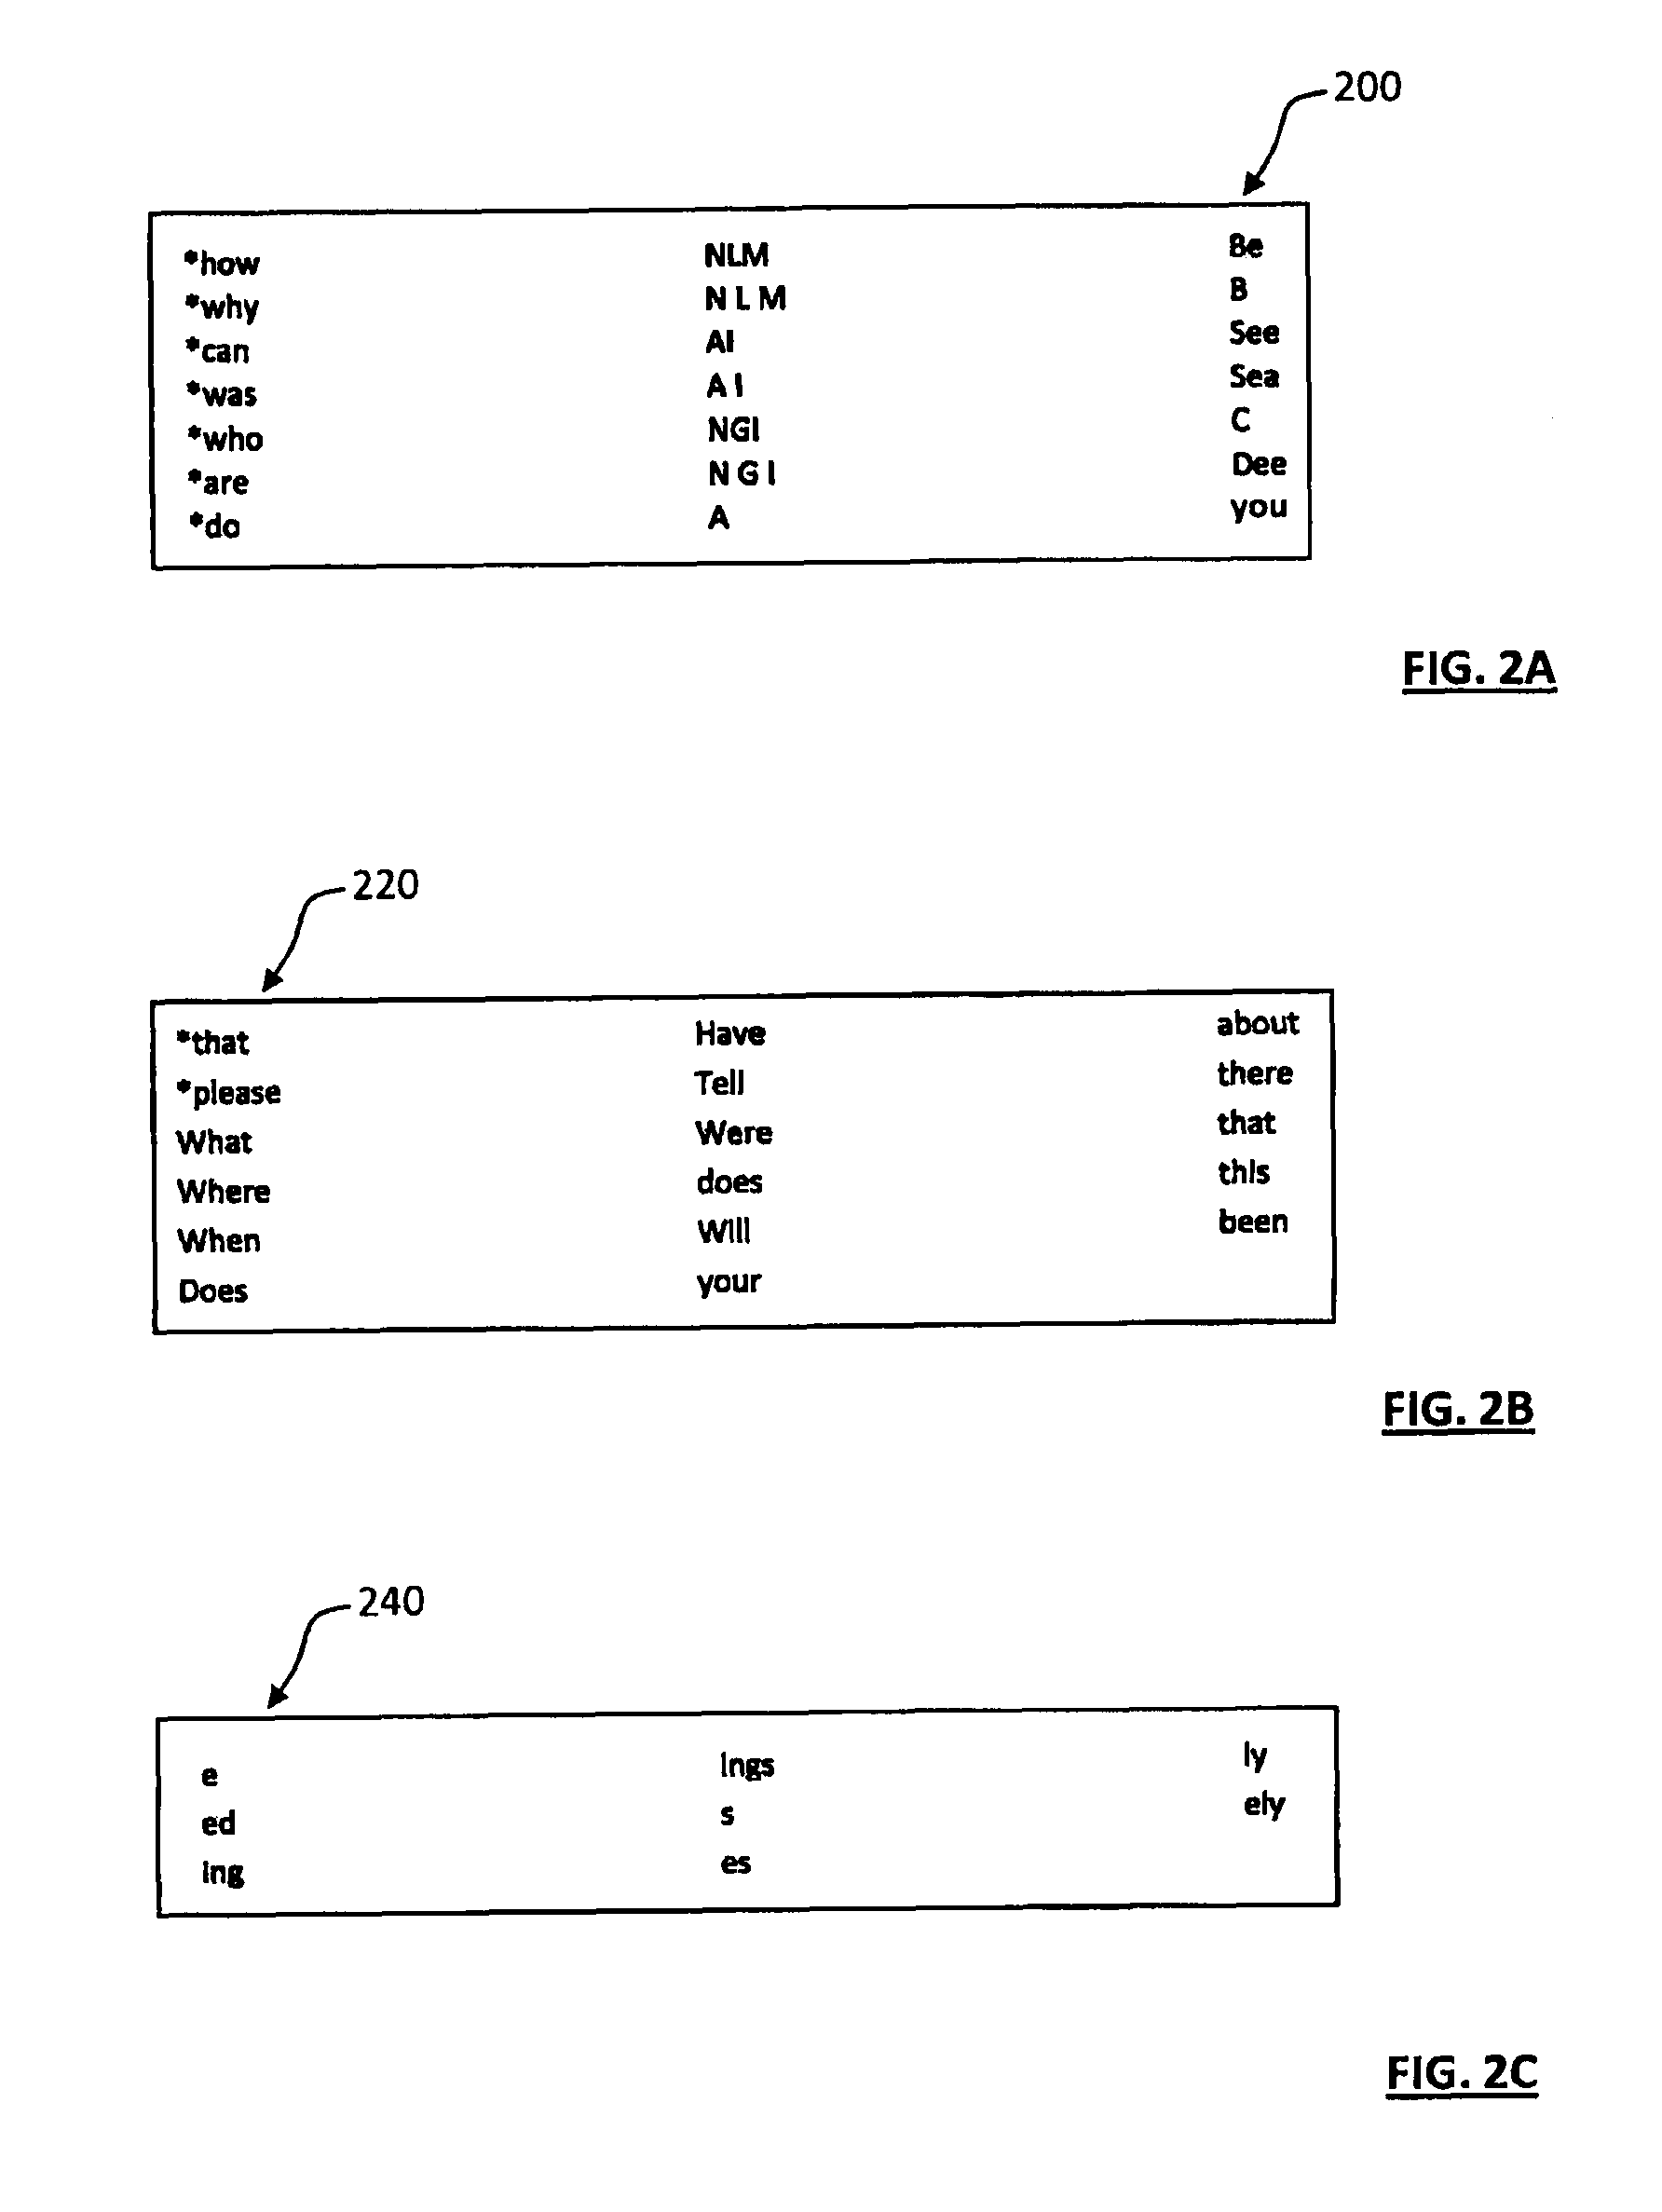 Systems and methods for extracting meaning from speech-to-text data